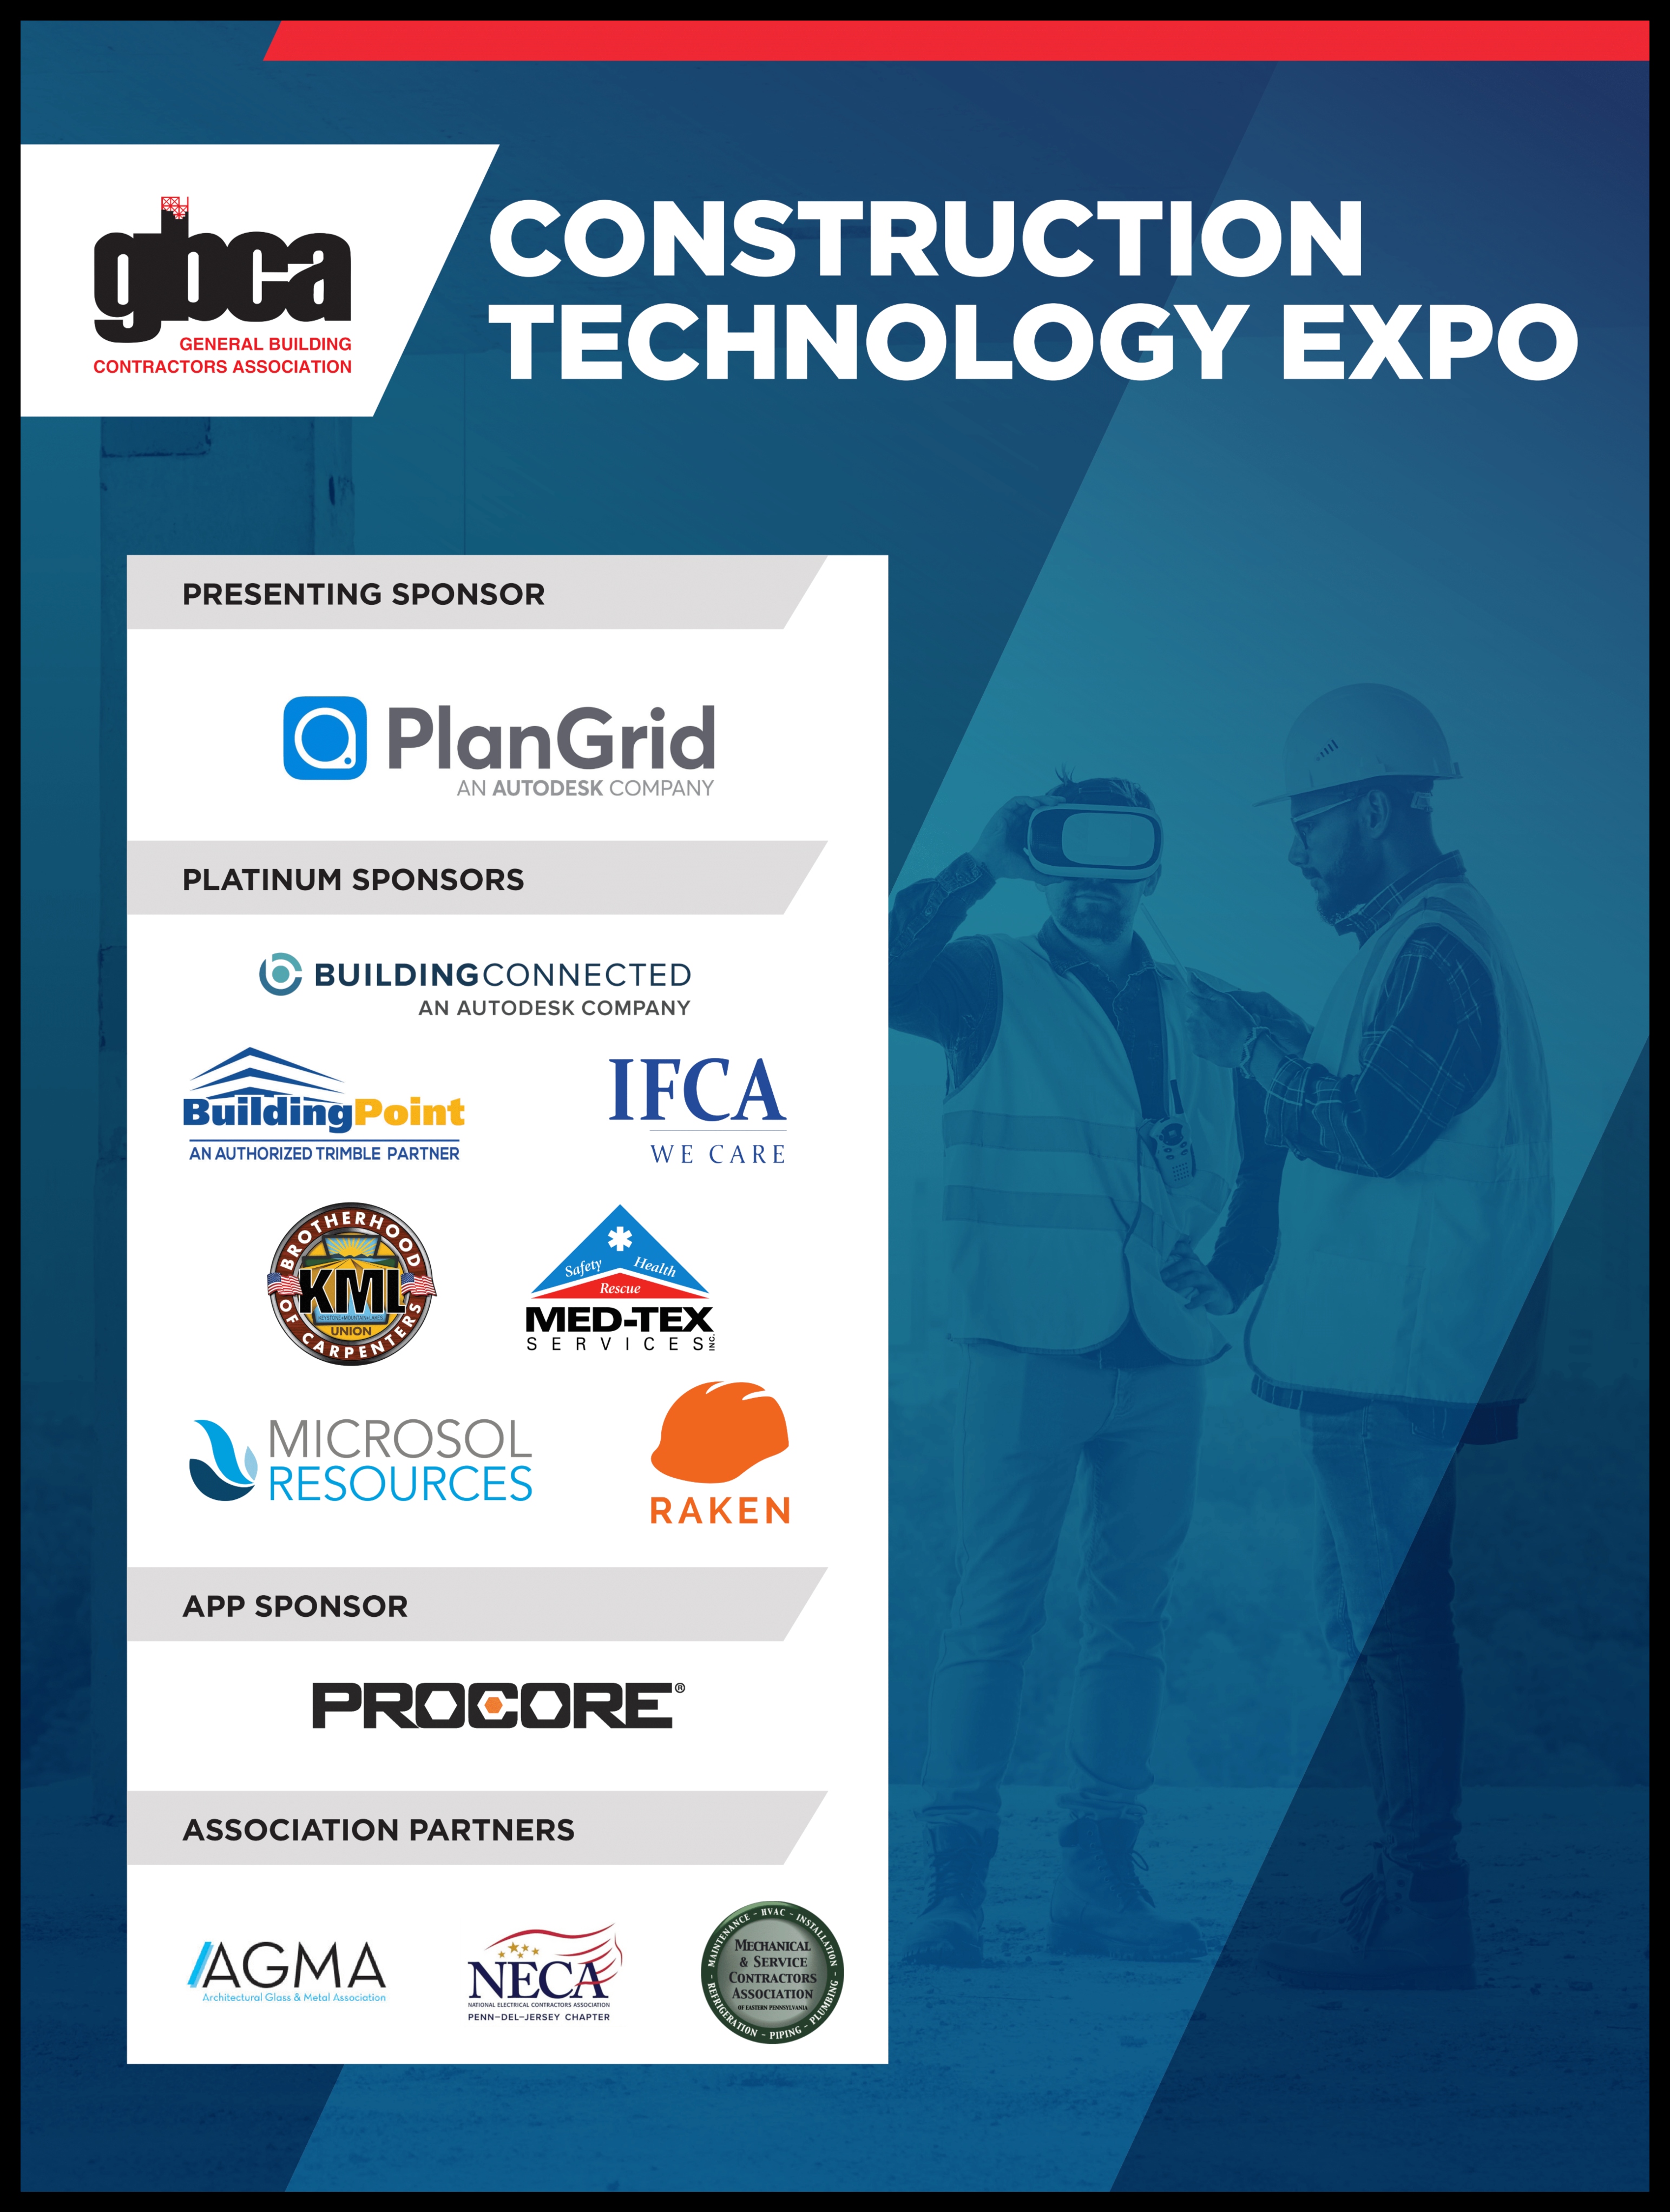 Construction Technology Expo Media Coverage